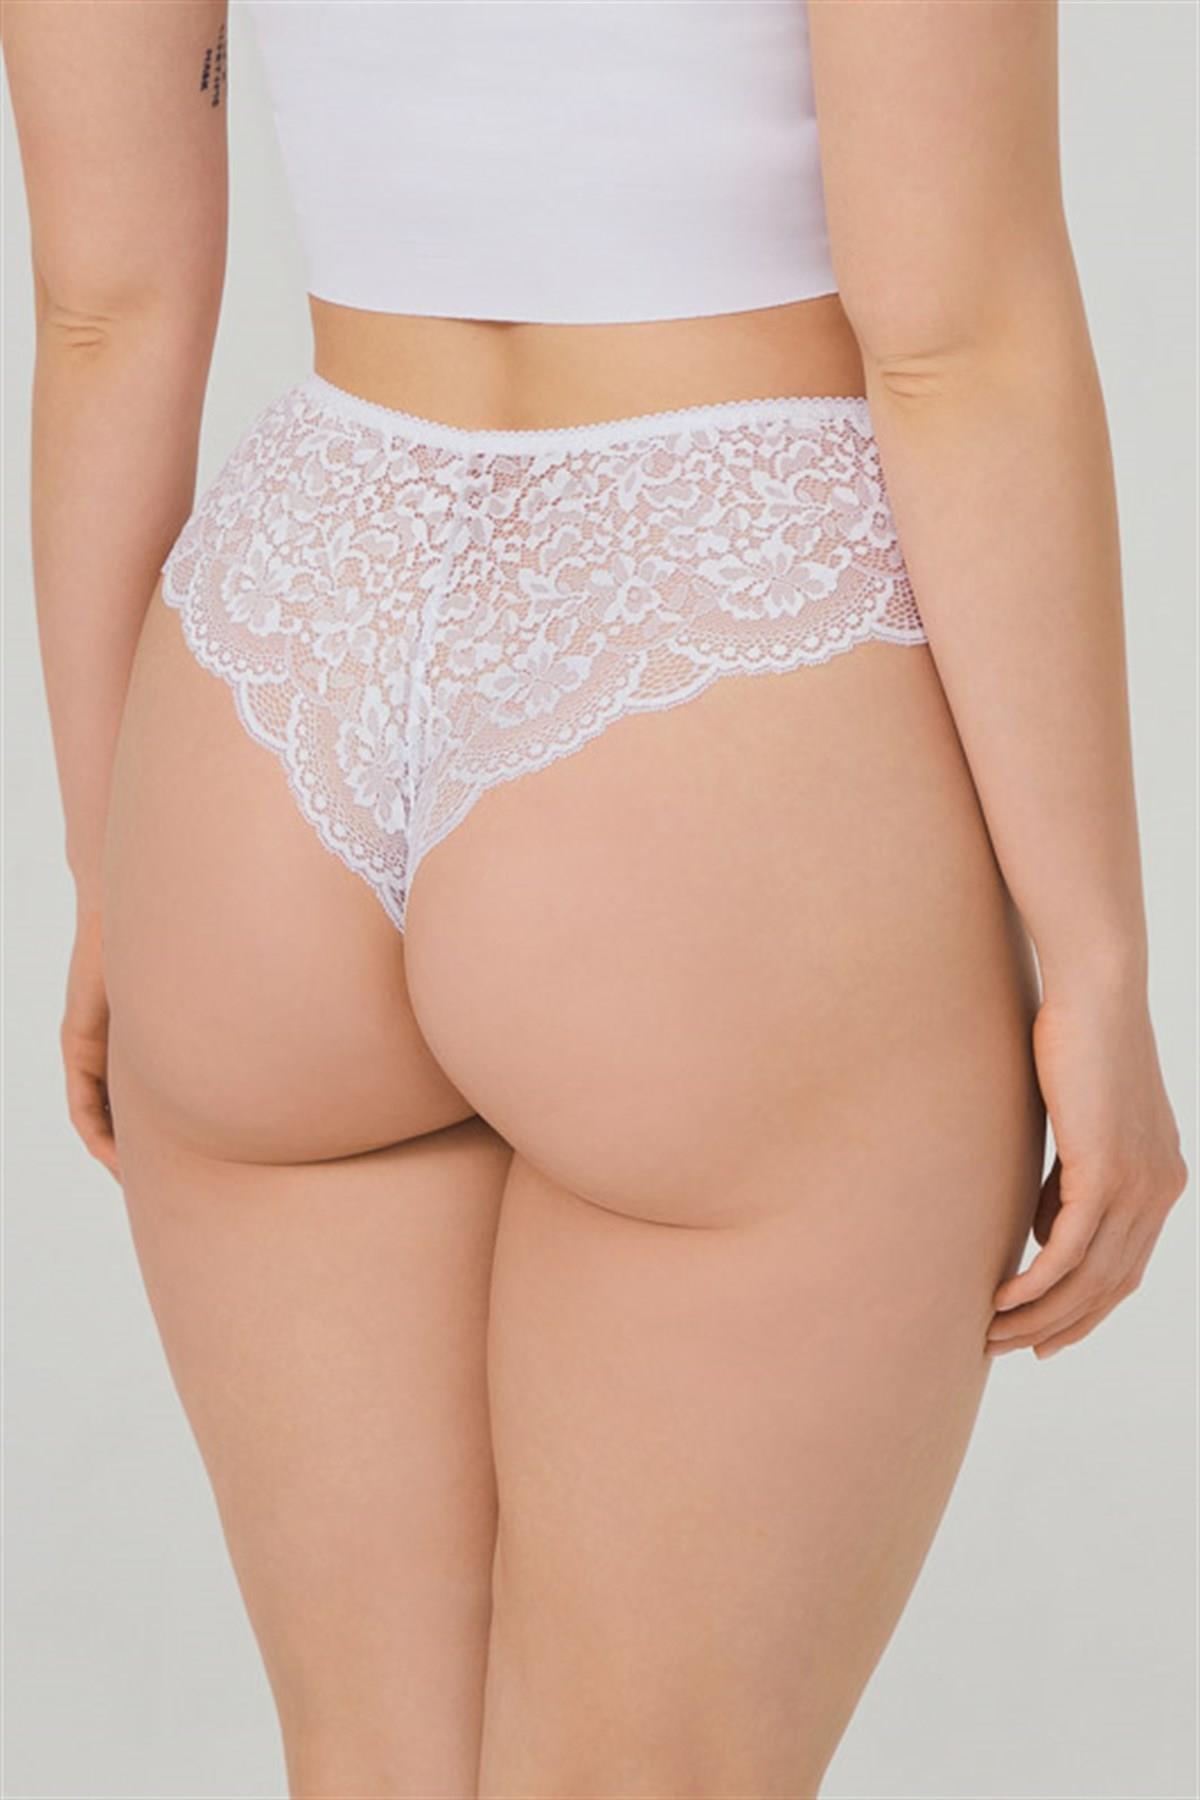 Of Plus Size Cotton Seamless Lace Panties Elegant And Comfortable Lingerie  For Ladies Available In XXXXL To XXL Sizes 220425 L230915 From  Essential_hoodie, $6.19